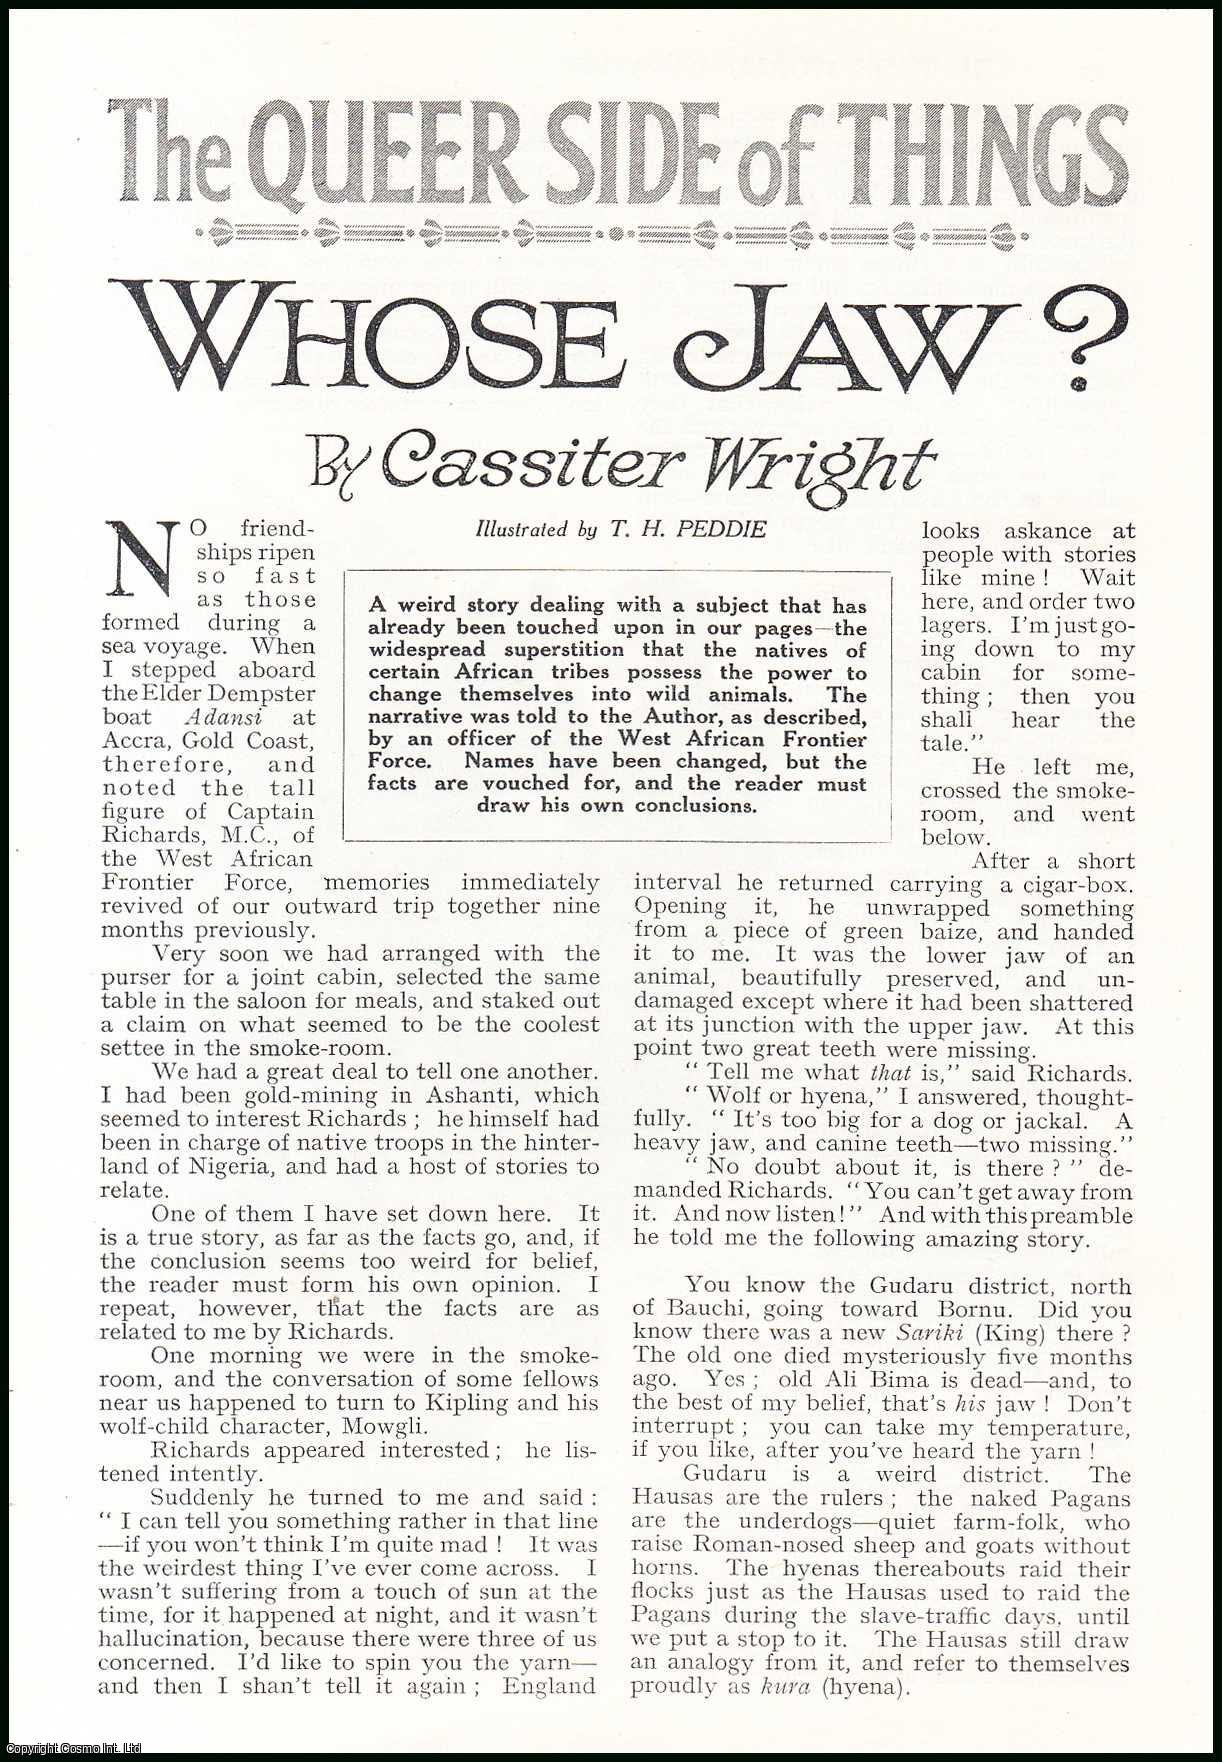 Cassiter Wright. Illustrated by T.H. Peddie. - Whose Jaw ? A story of the Natives of certain African Tribes possess the Power to change themselves into Wild Animals. An uncommon original article from the Wide World Magazine, 1931.